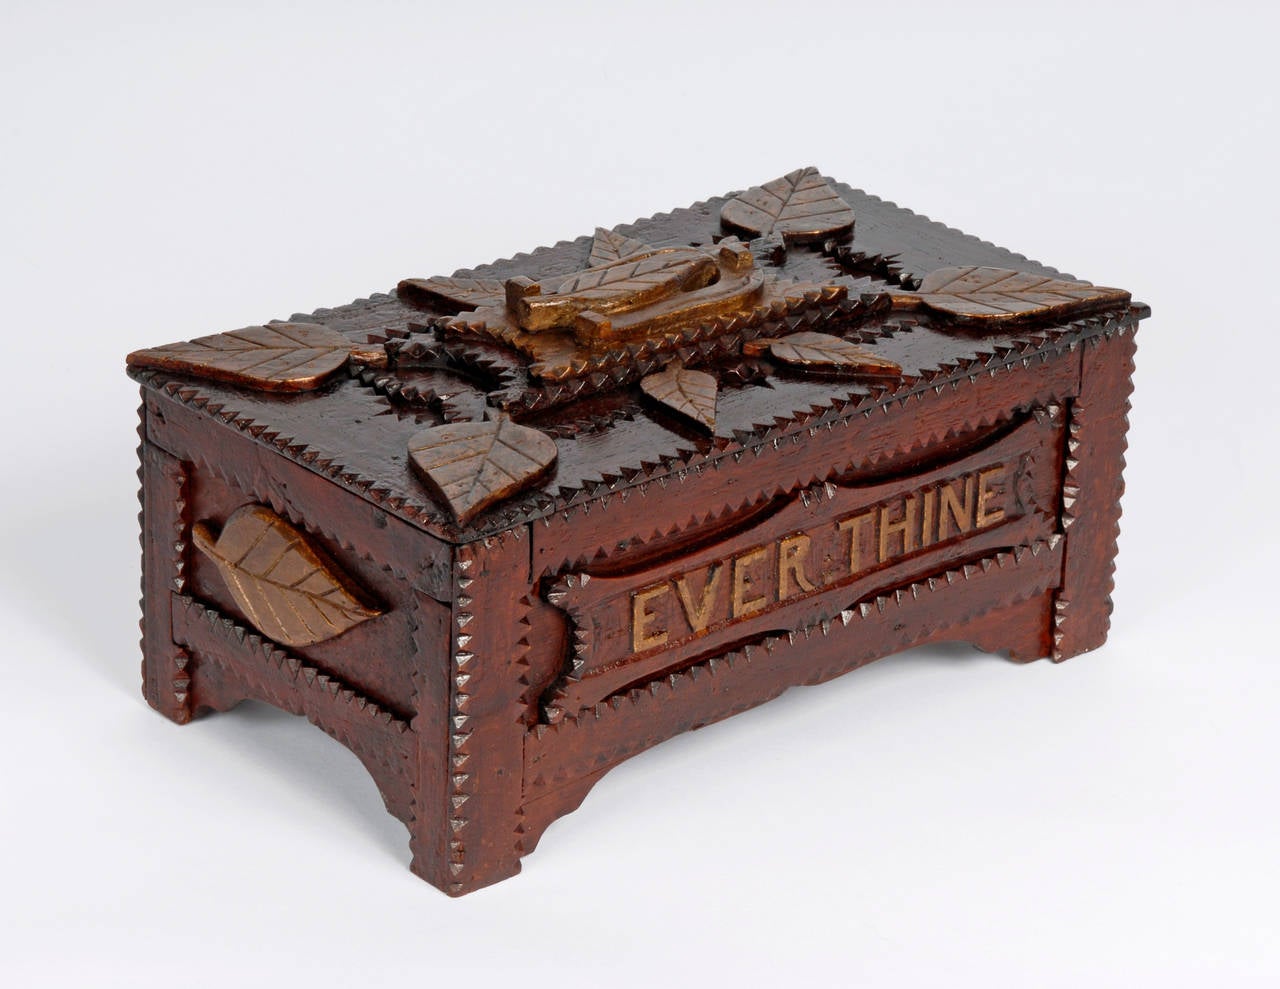 Folk Art 'Ever Thine' Inscribed Tramp Art Box with Leaves, Hearts and a Horeshoe